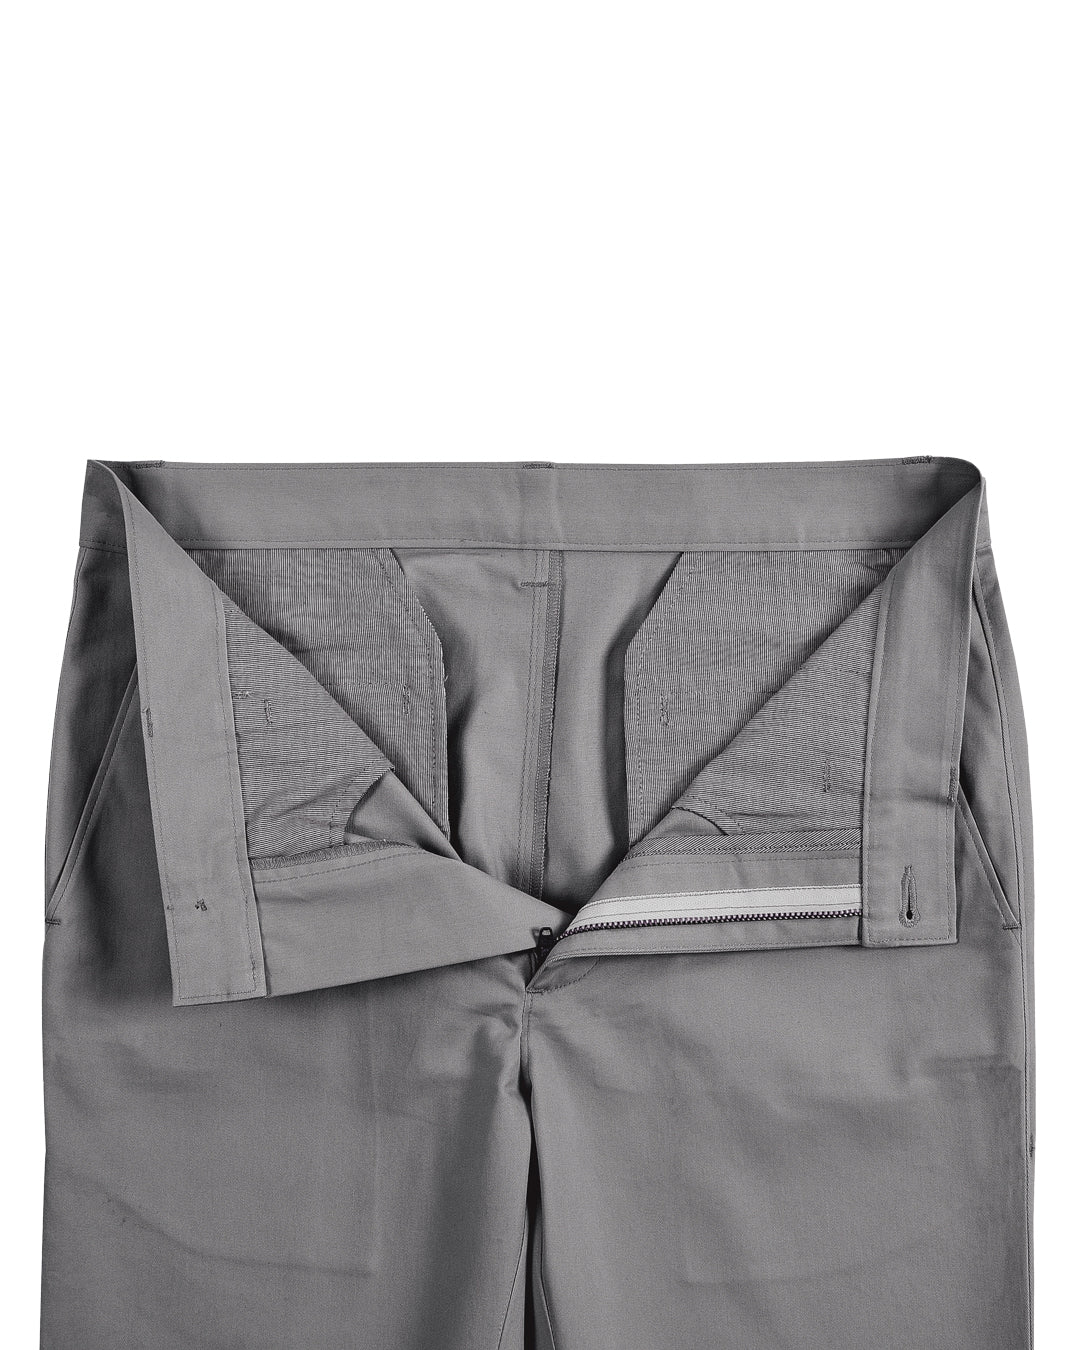 Front open view of custom Genoa Chino pants for men by Luxire in dark grey